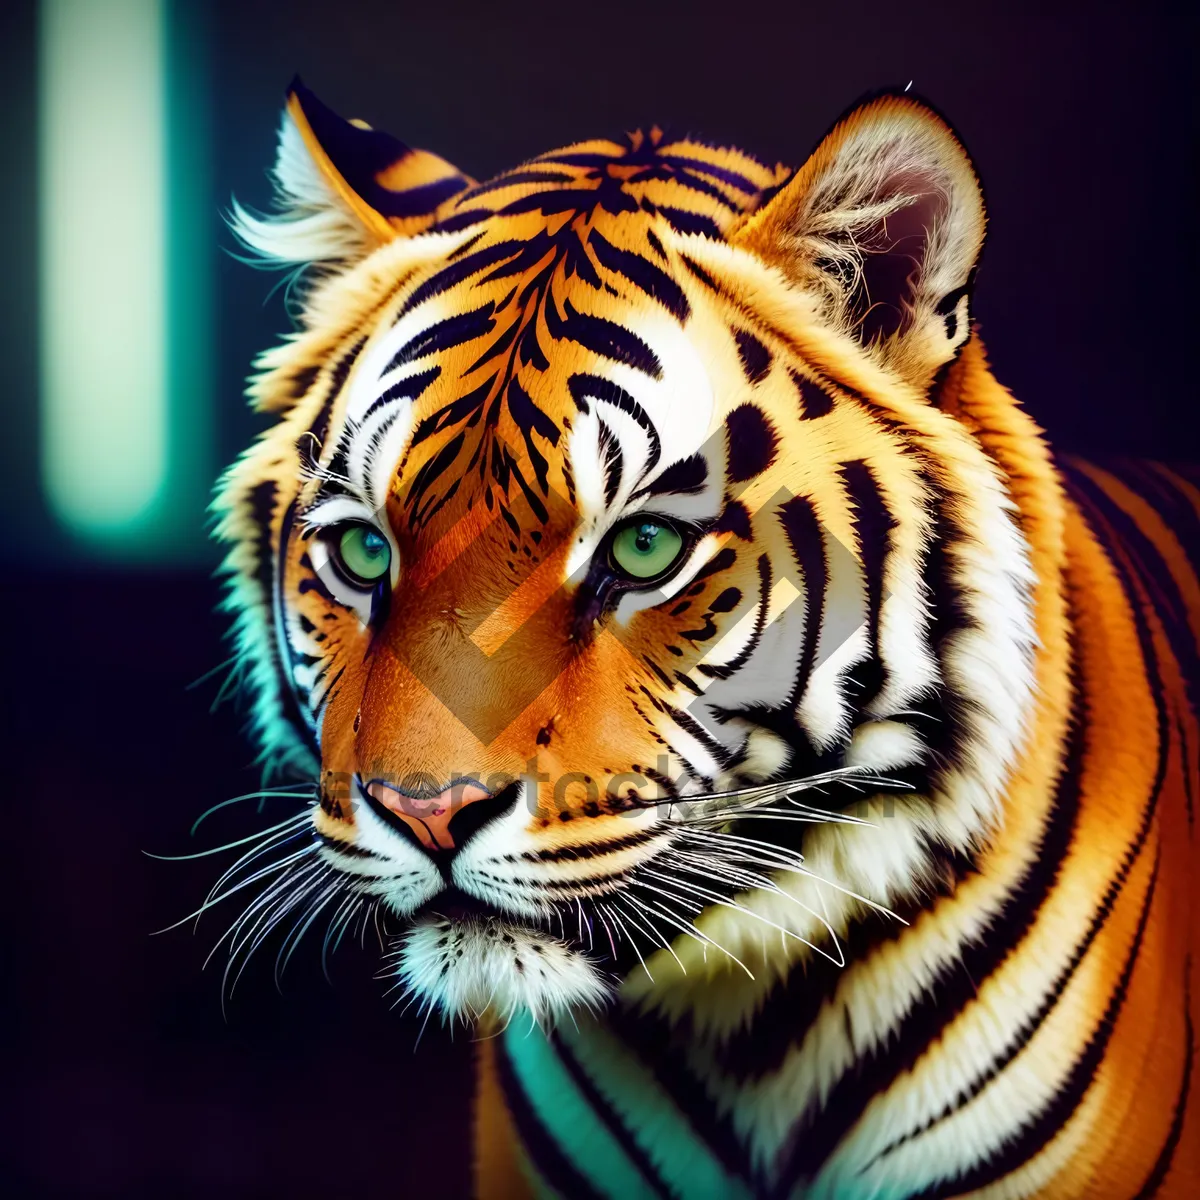 Picture of Fierce Predator: Majestic Tiger with Striking Stripes